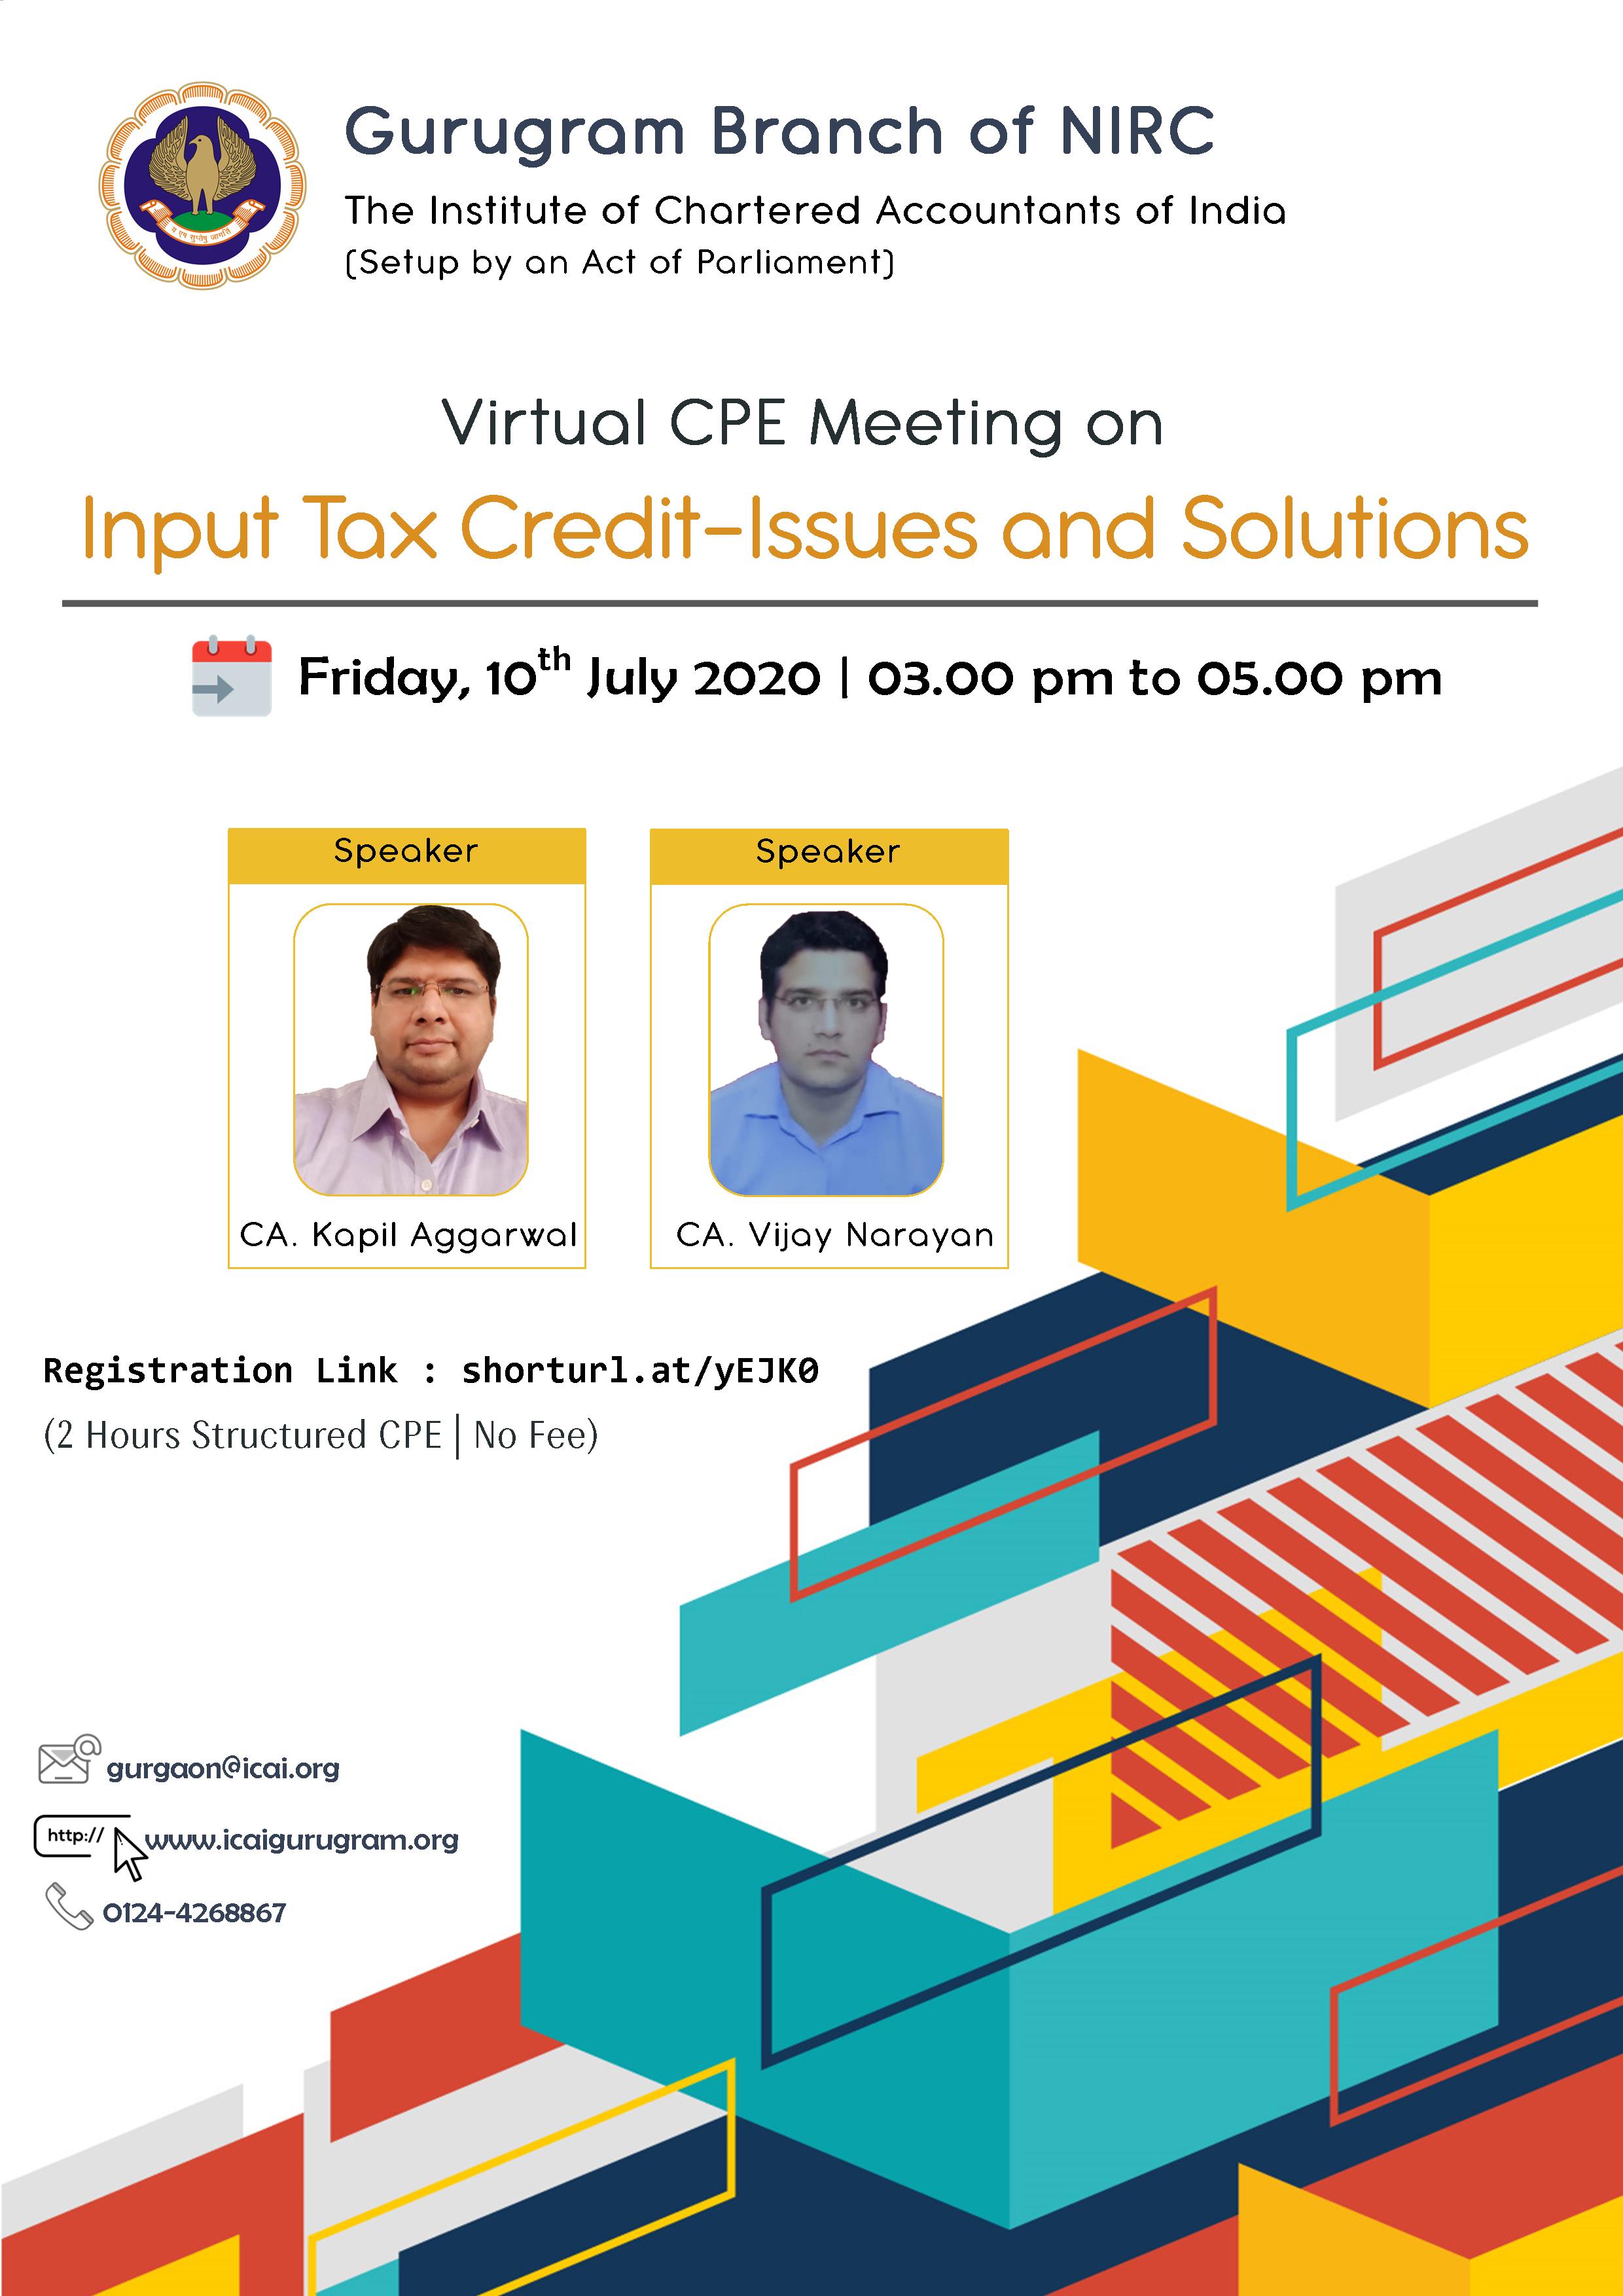 Virtual CPE Meeting on Input Tax Credit-Issues and Solutions